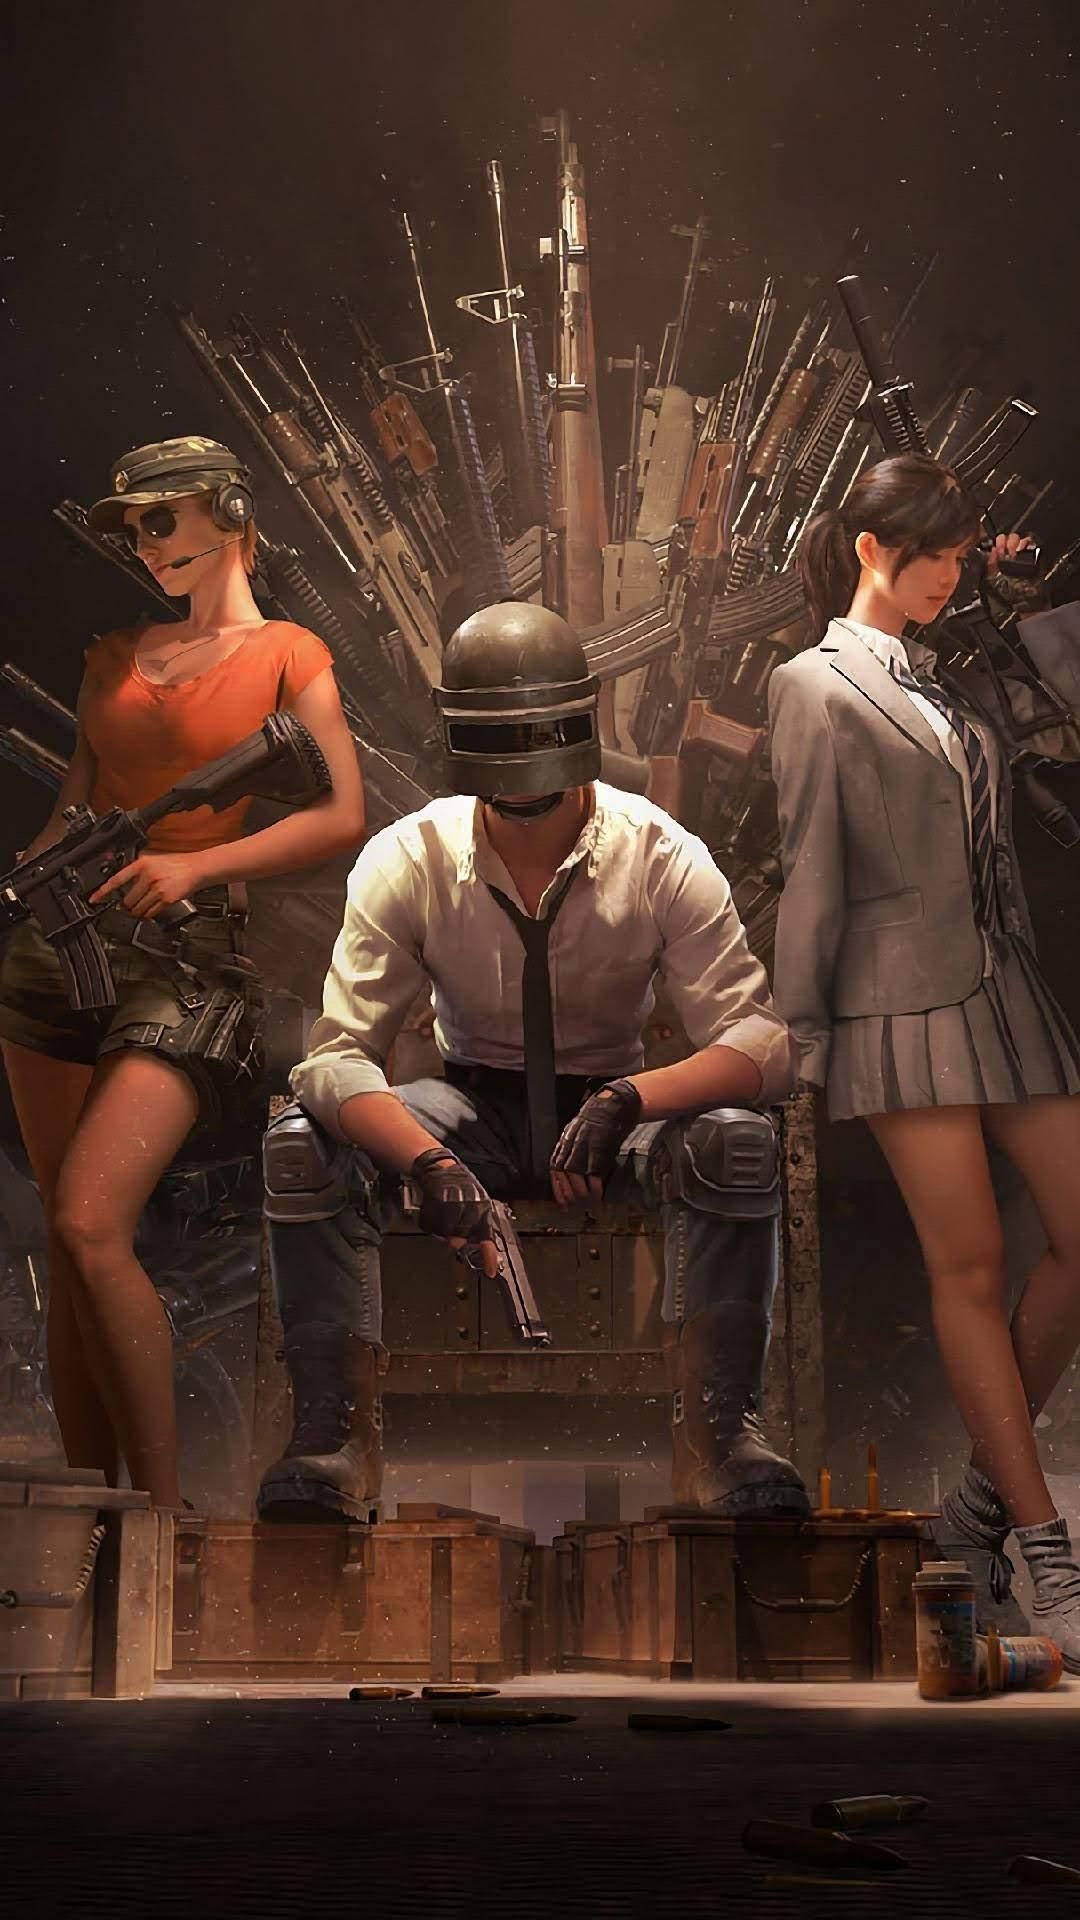 Any PUBG loves here?. iPhone 7 plus wallpaper, Girl iphone wallpaper